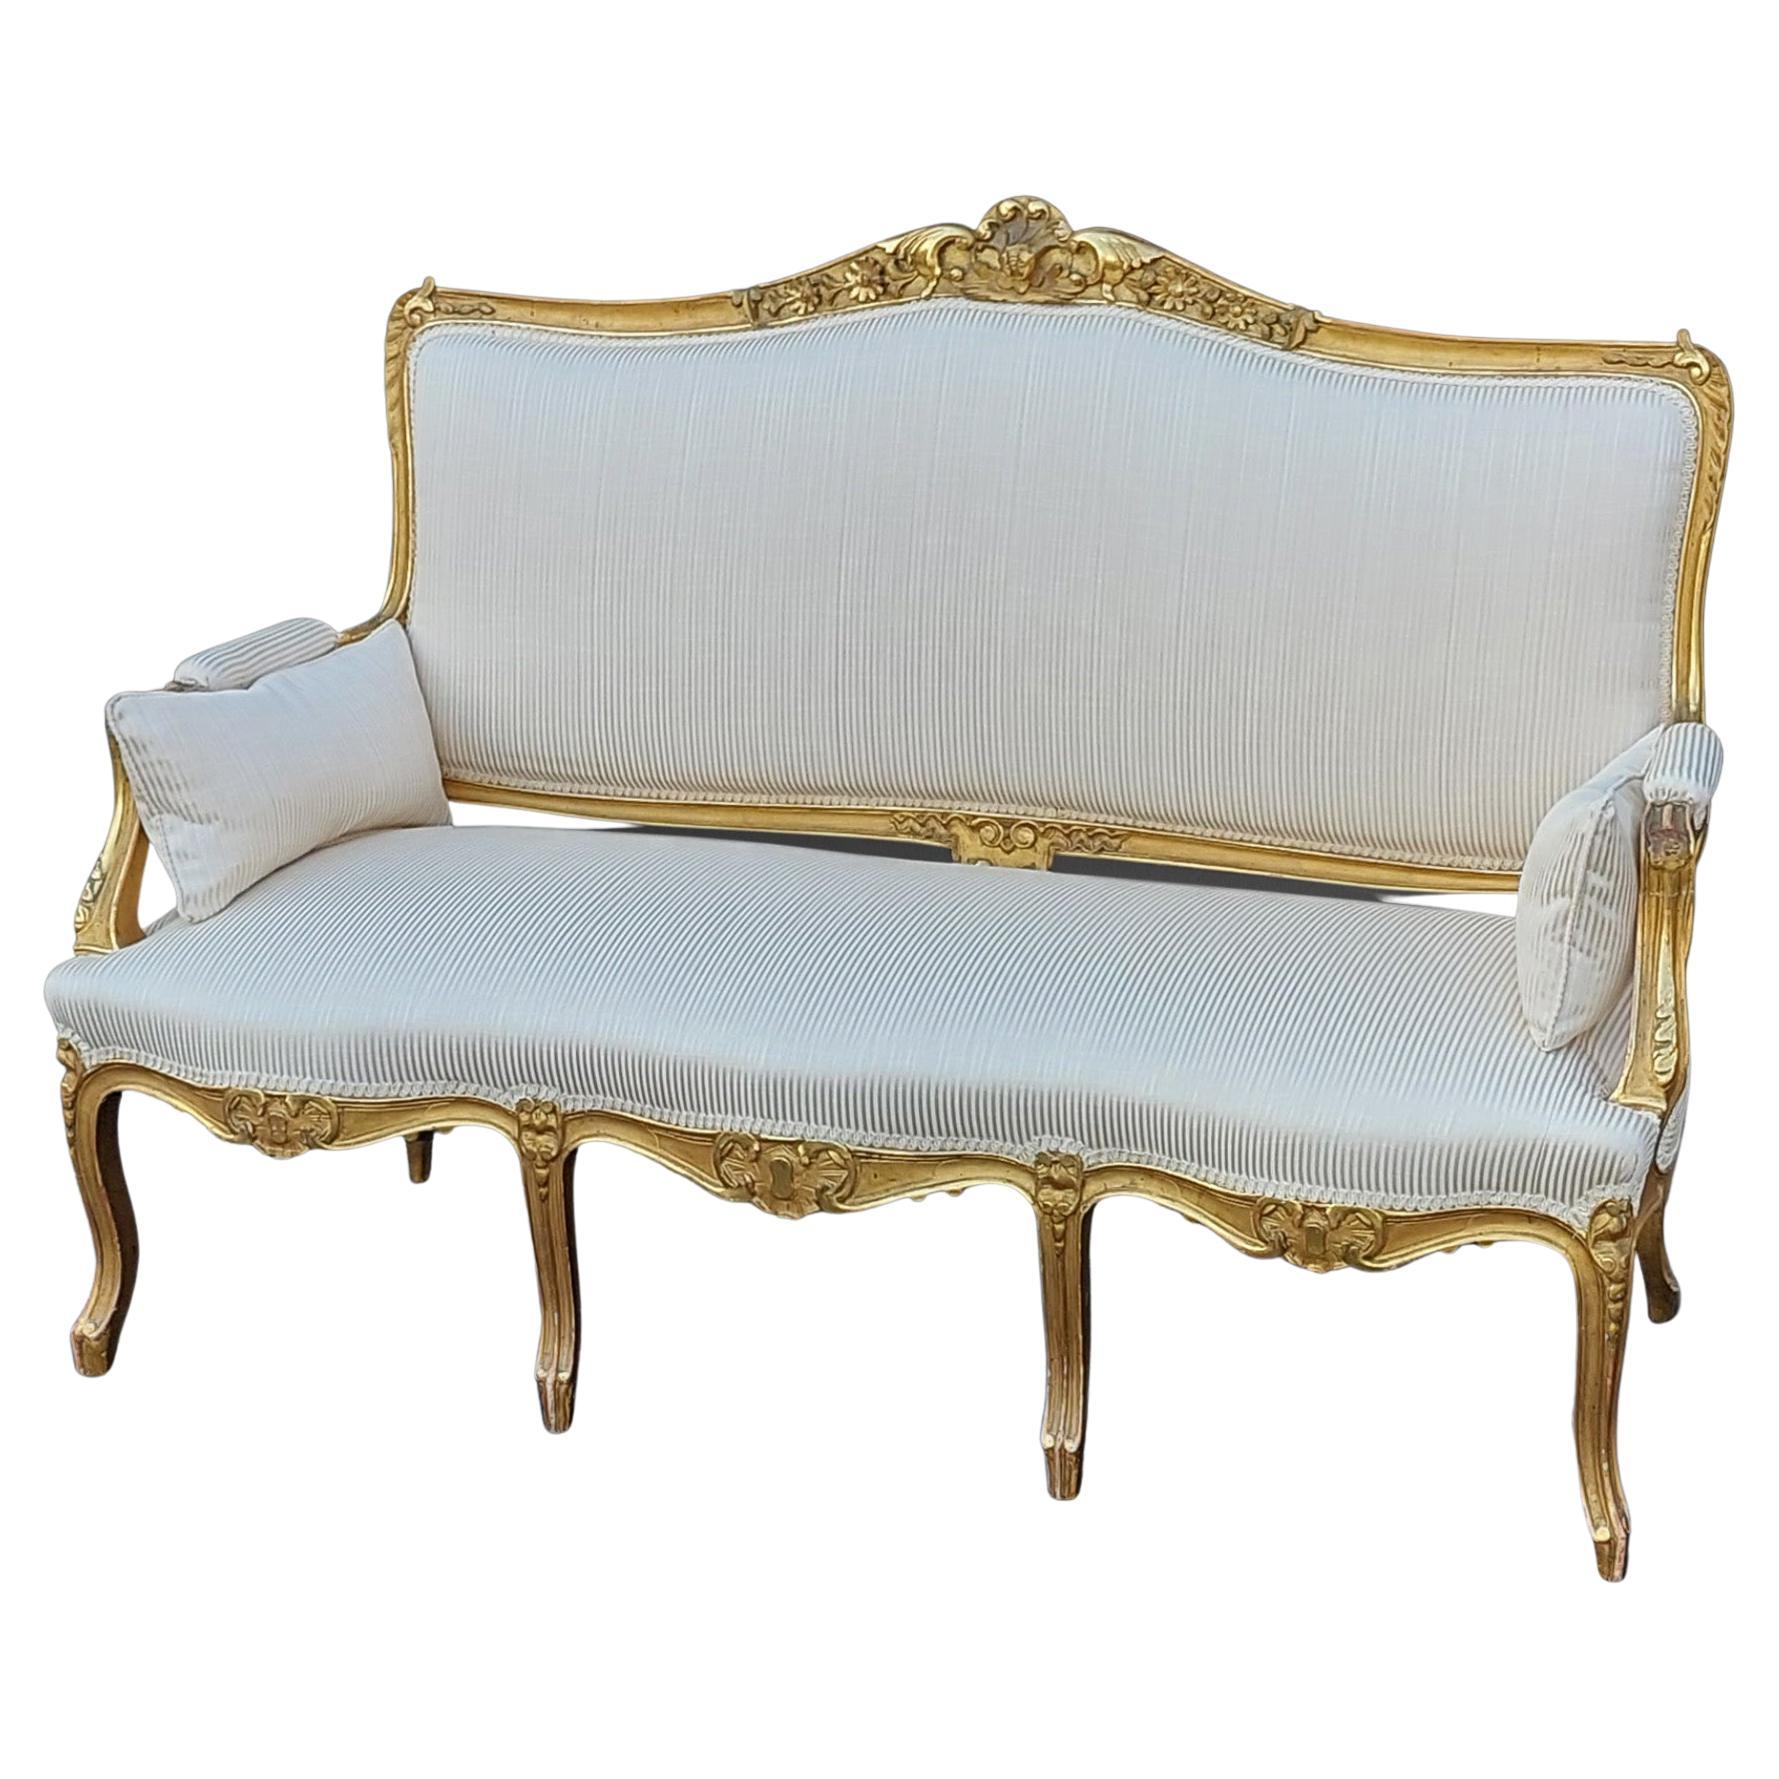 Late 19thC French Giltwood Settee Sofa For Sale